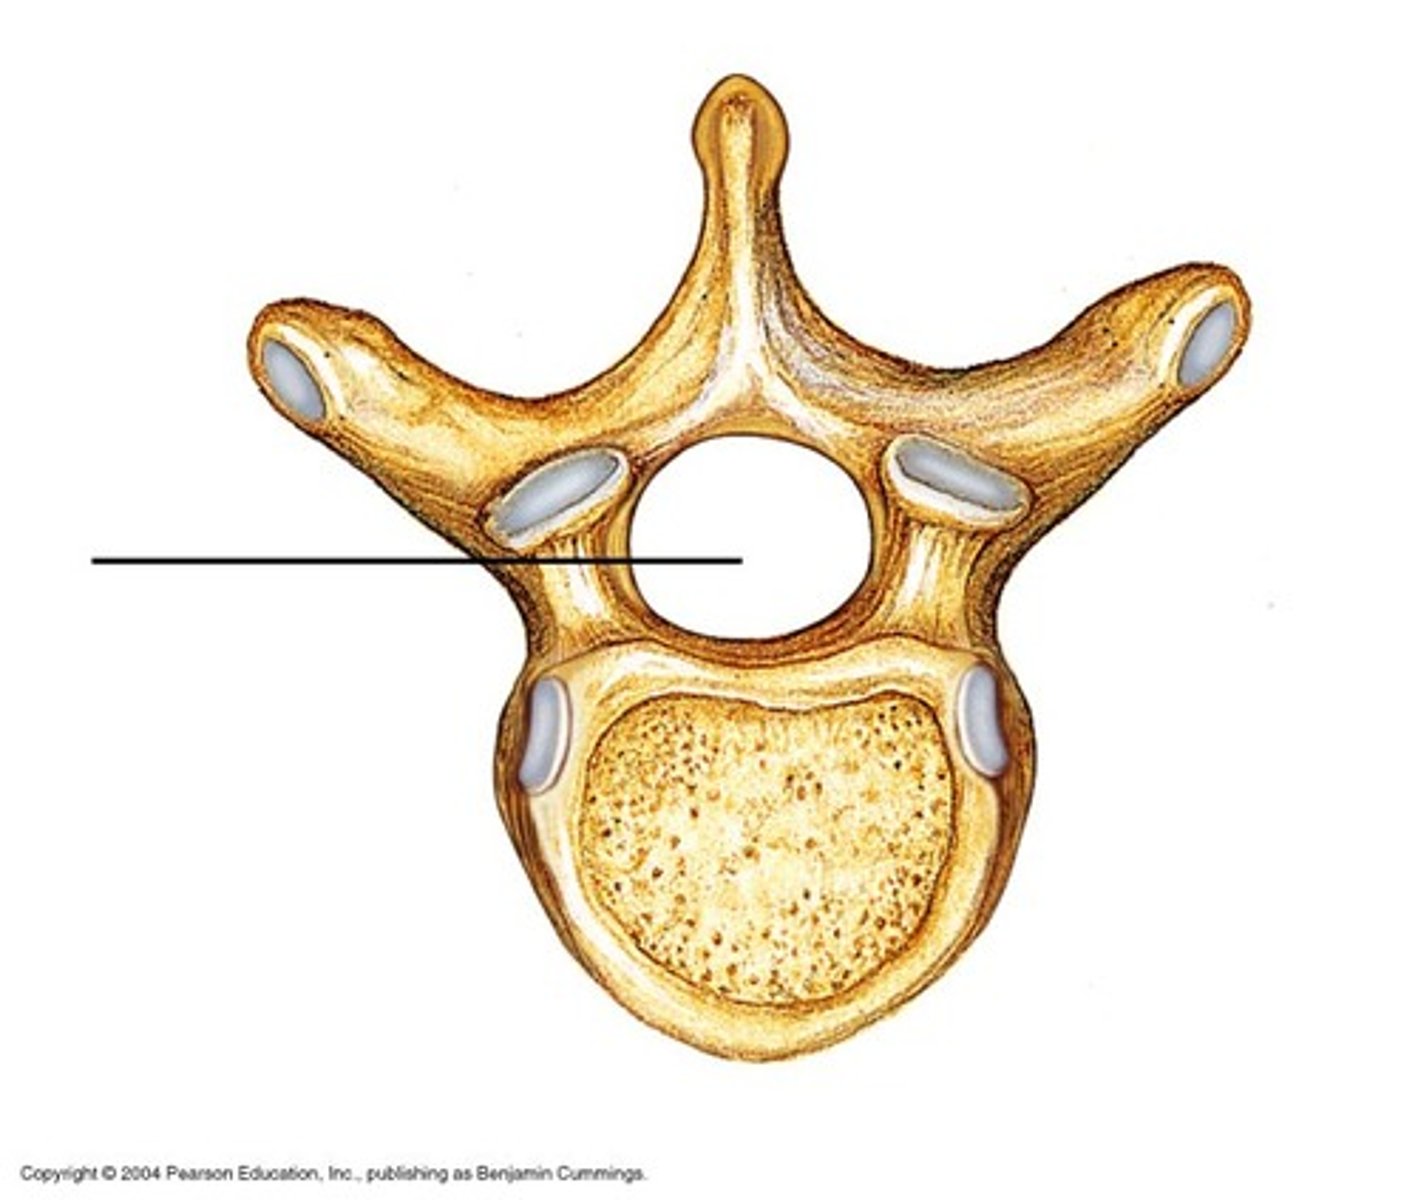 <p>Hole through which spinal cord passes</p>